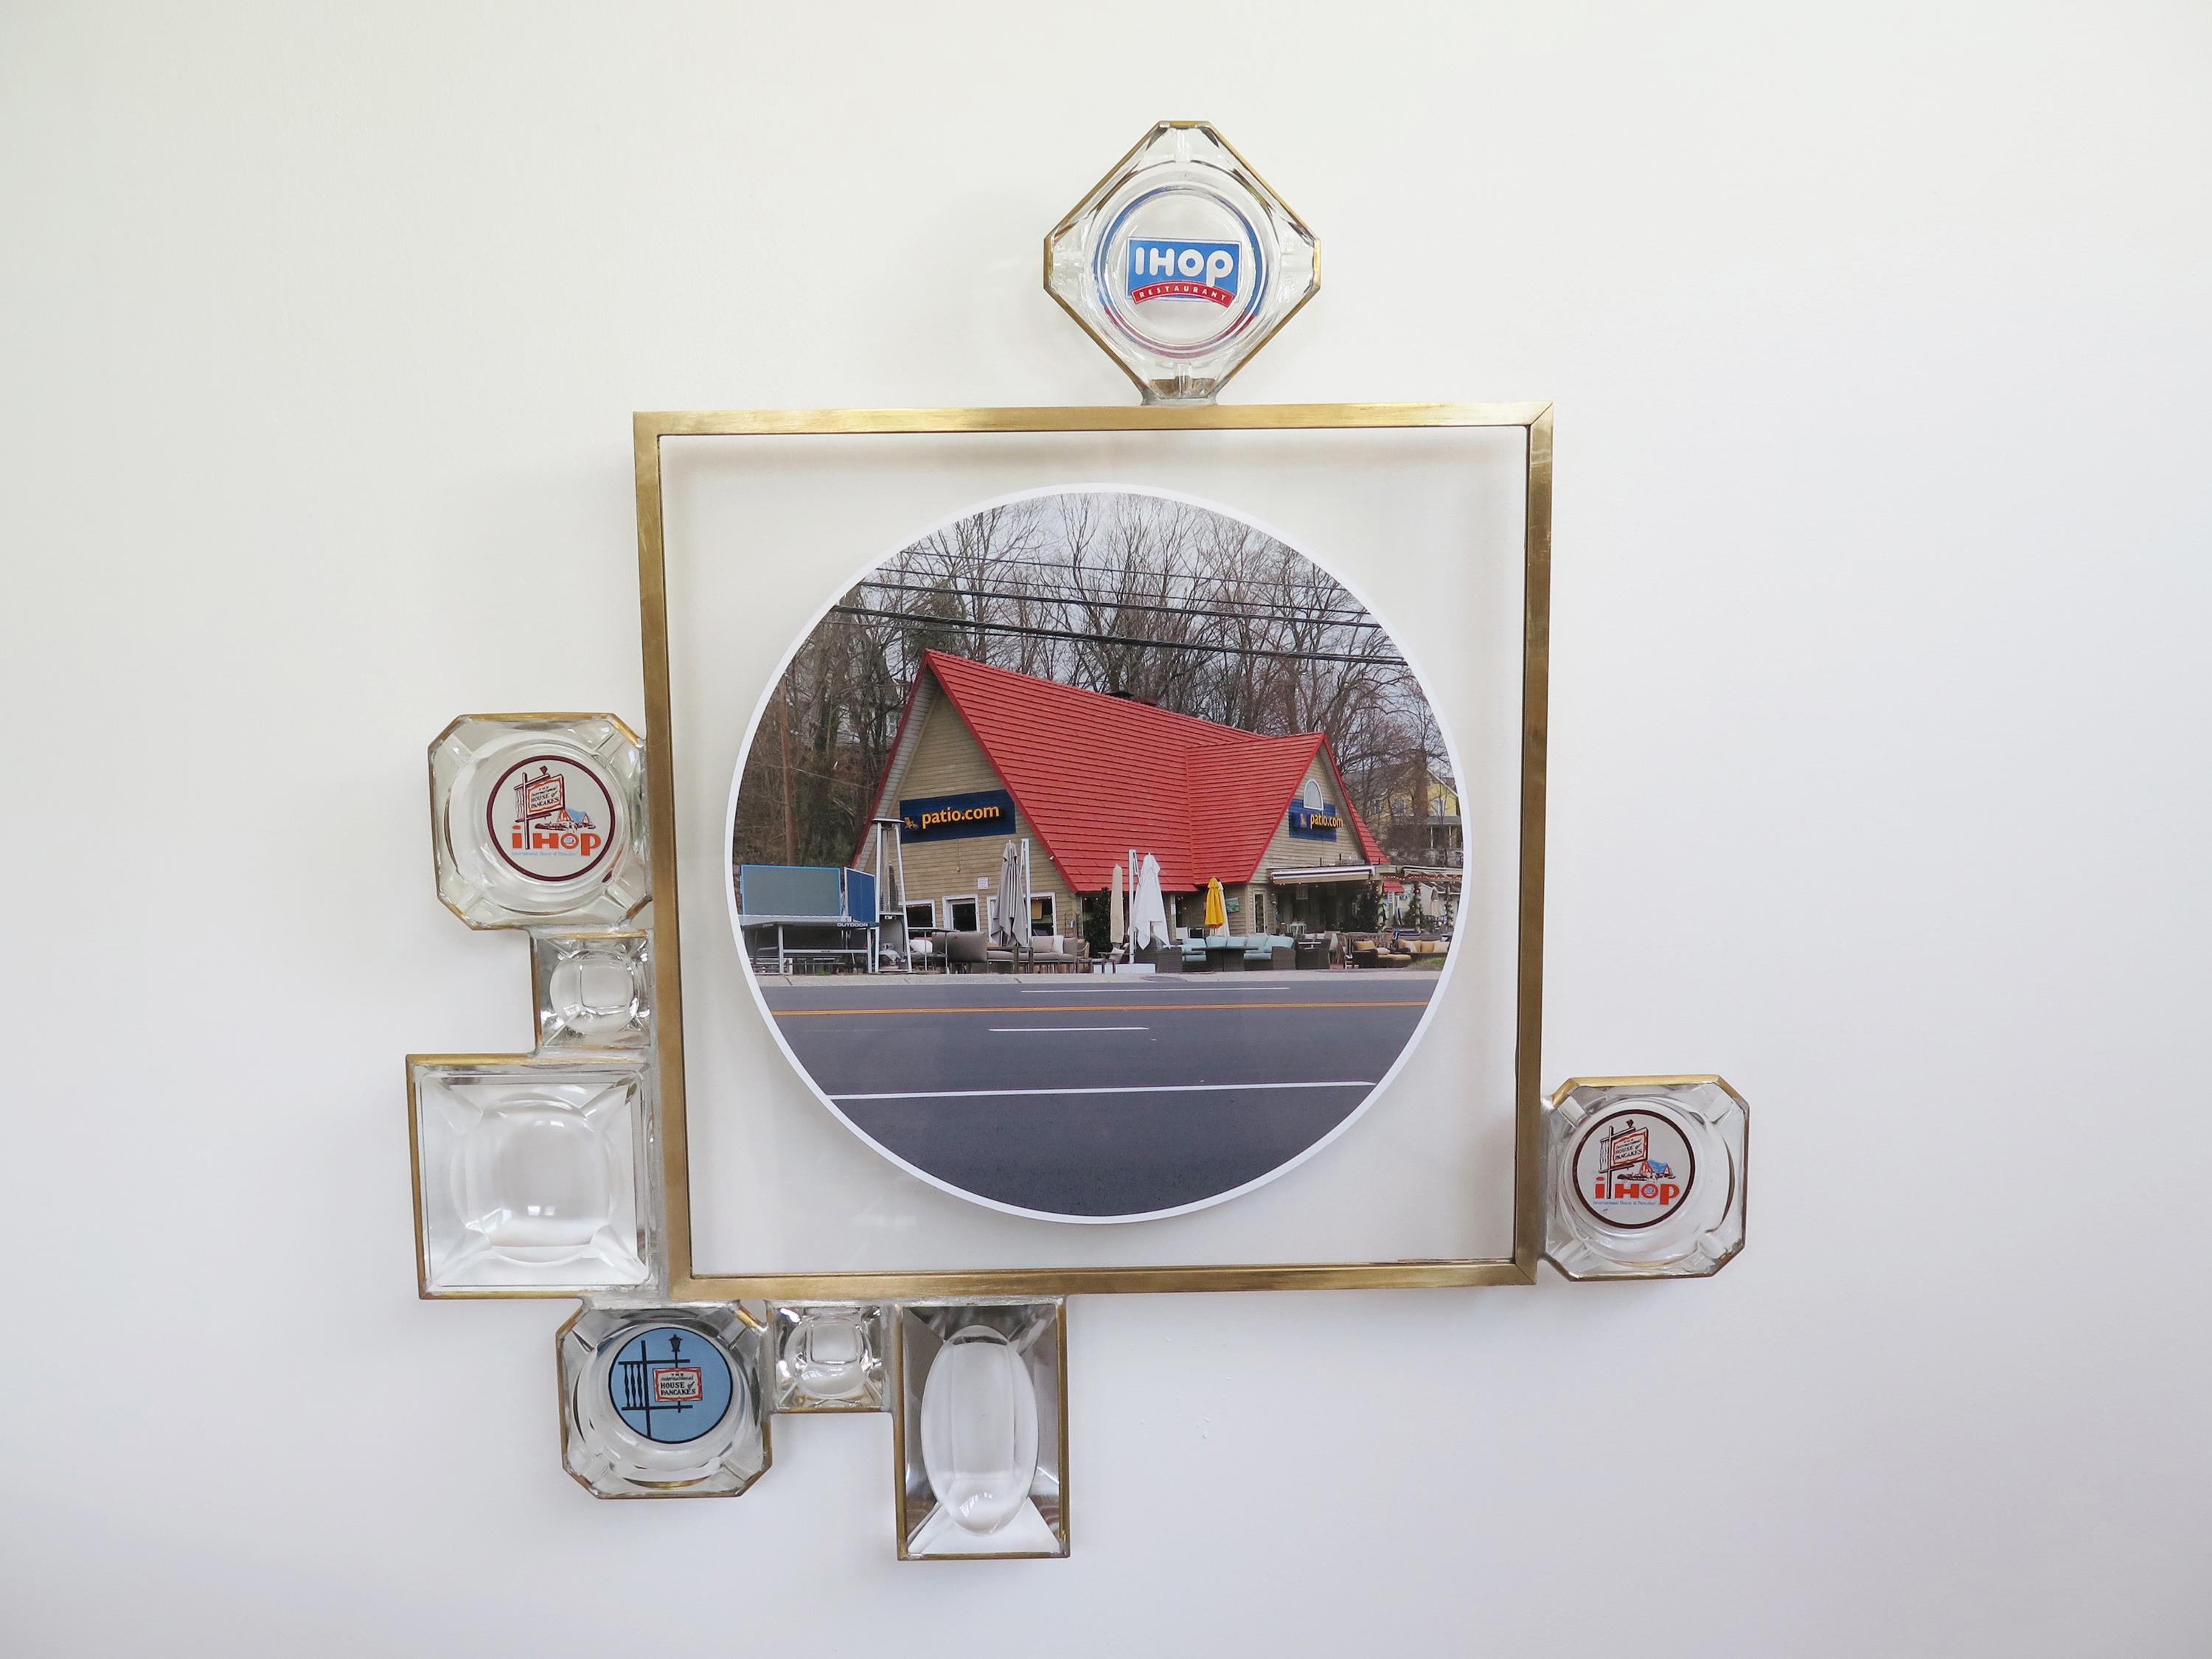 Richard Klein, iHop II, 2018, Found and altered objects assemblage